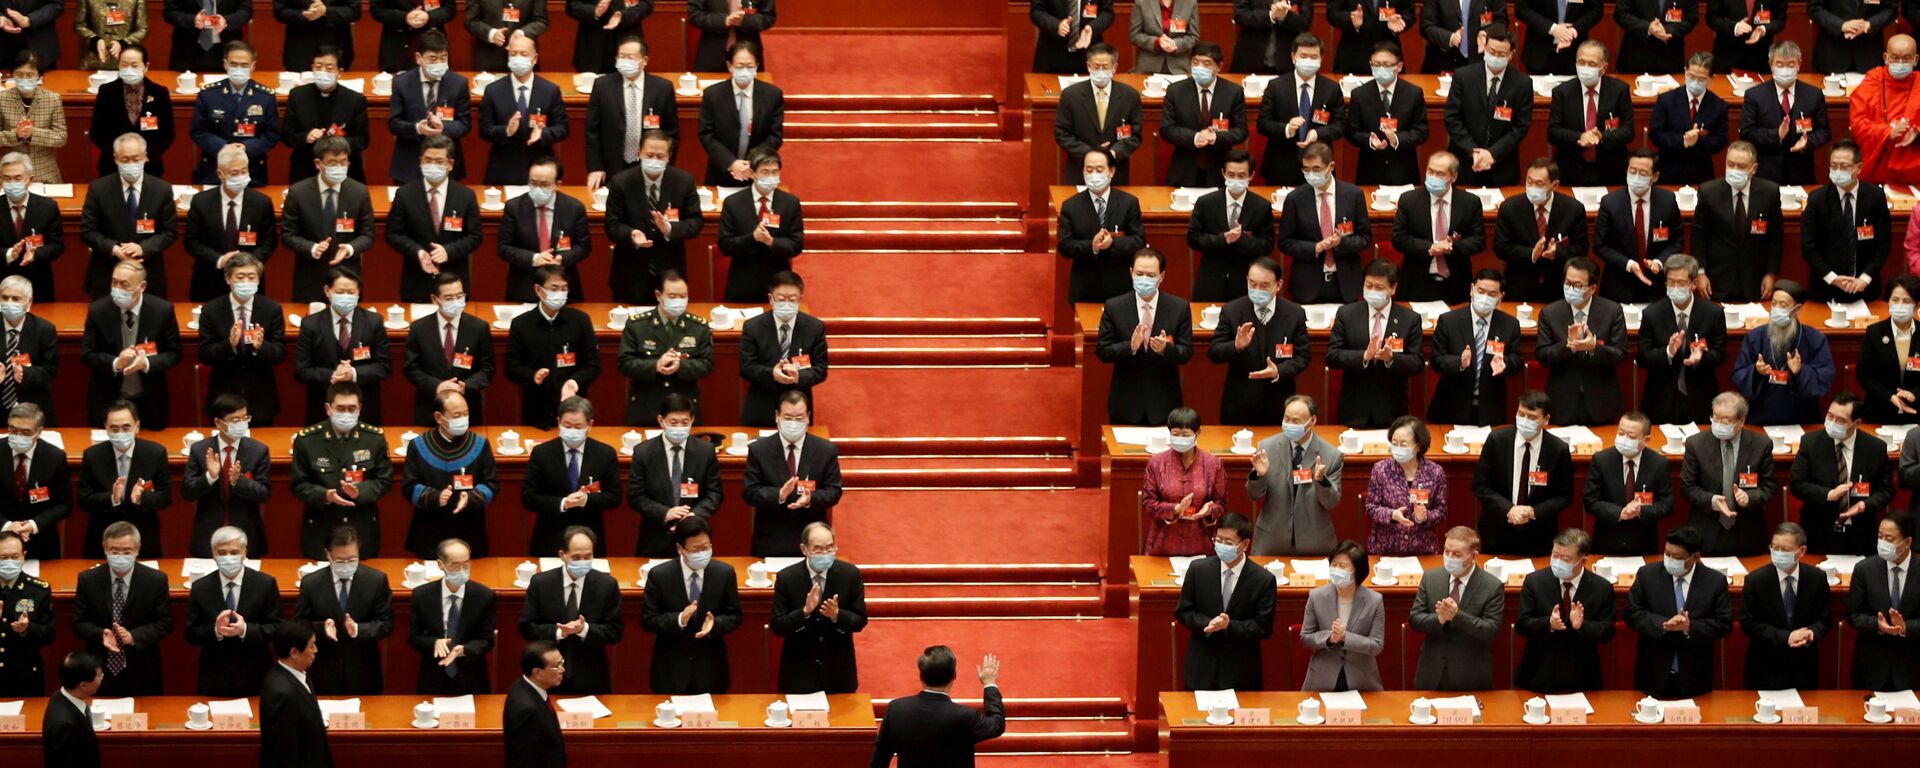 Chinese President Xi Jinping waves as he arrives for the opening session of the Chinese People's Political Consultative Conference (CPPCC) - Sputnik International, 1920, 04.03.2021